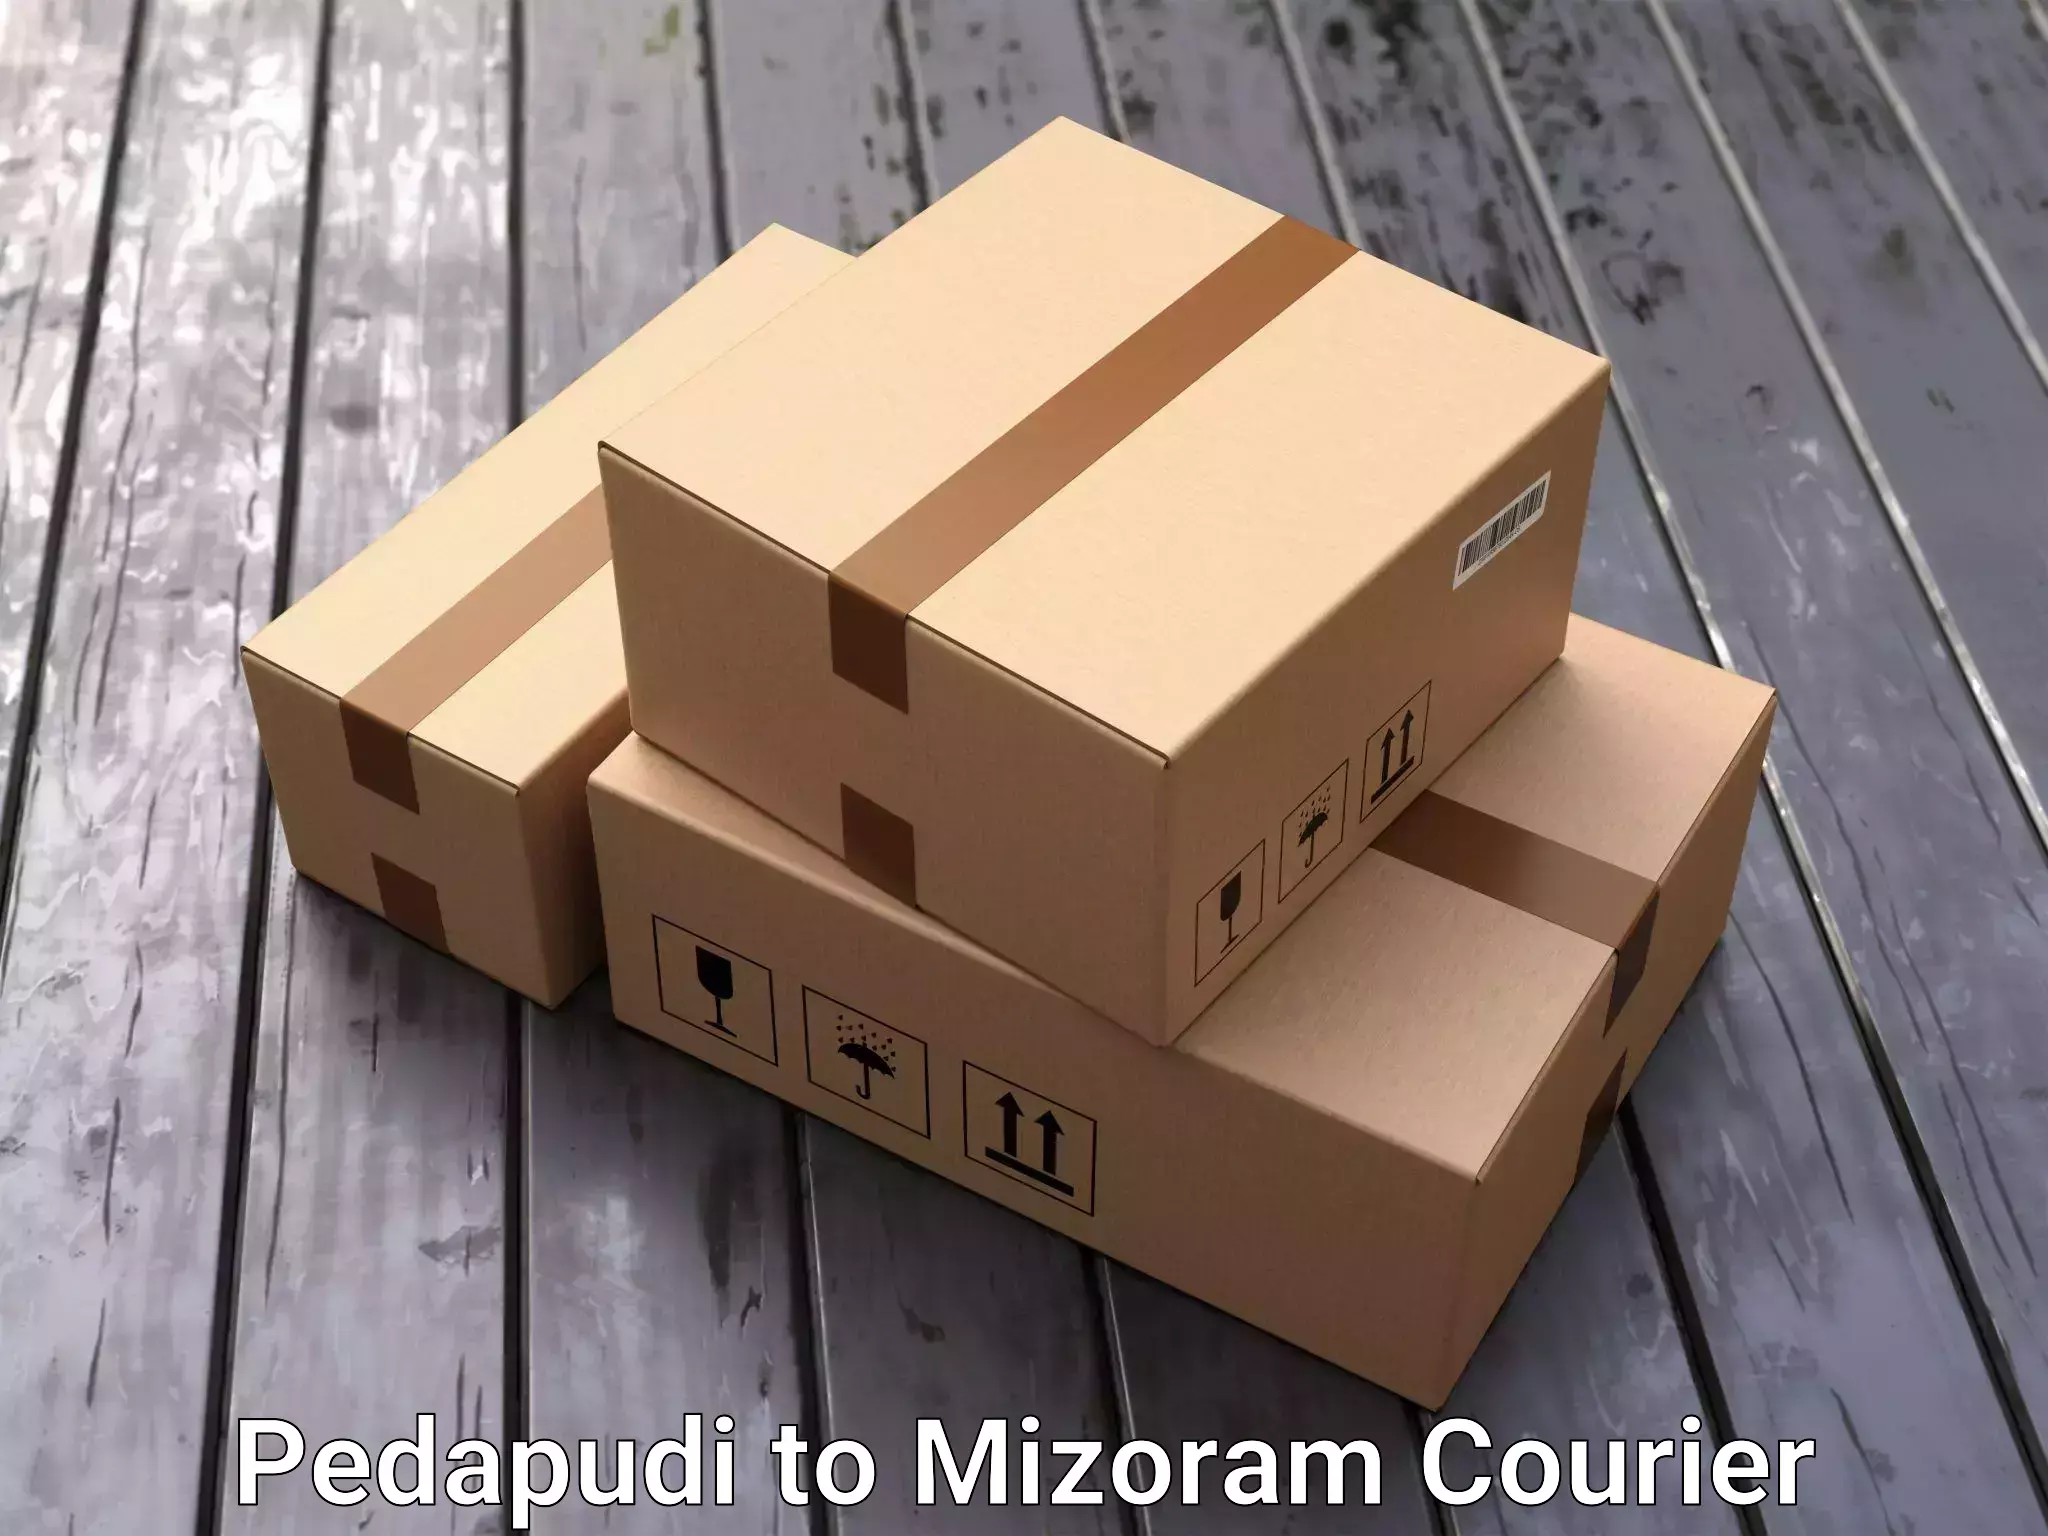 Home moving specialists Pedapudi to Mizoram